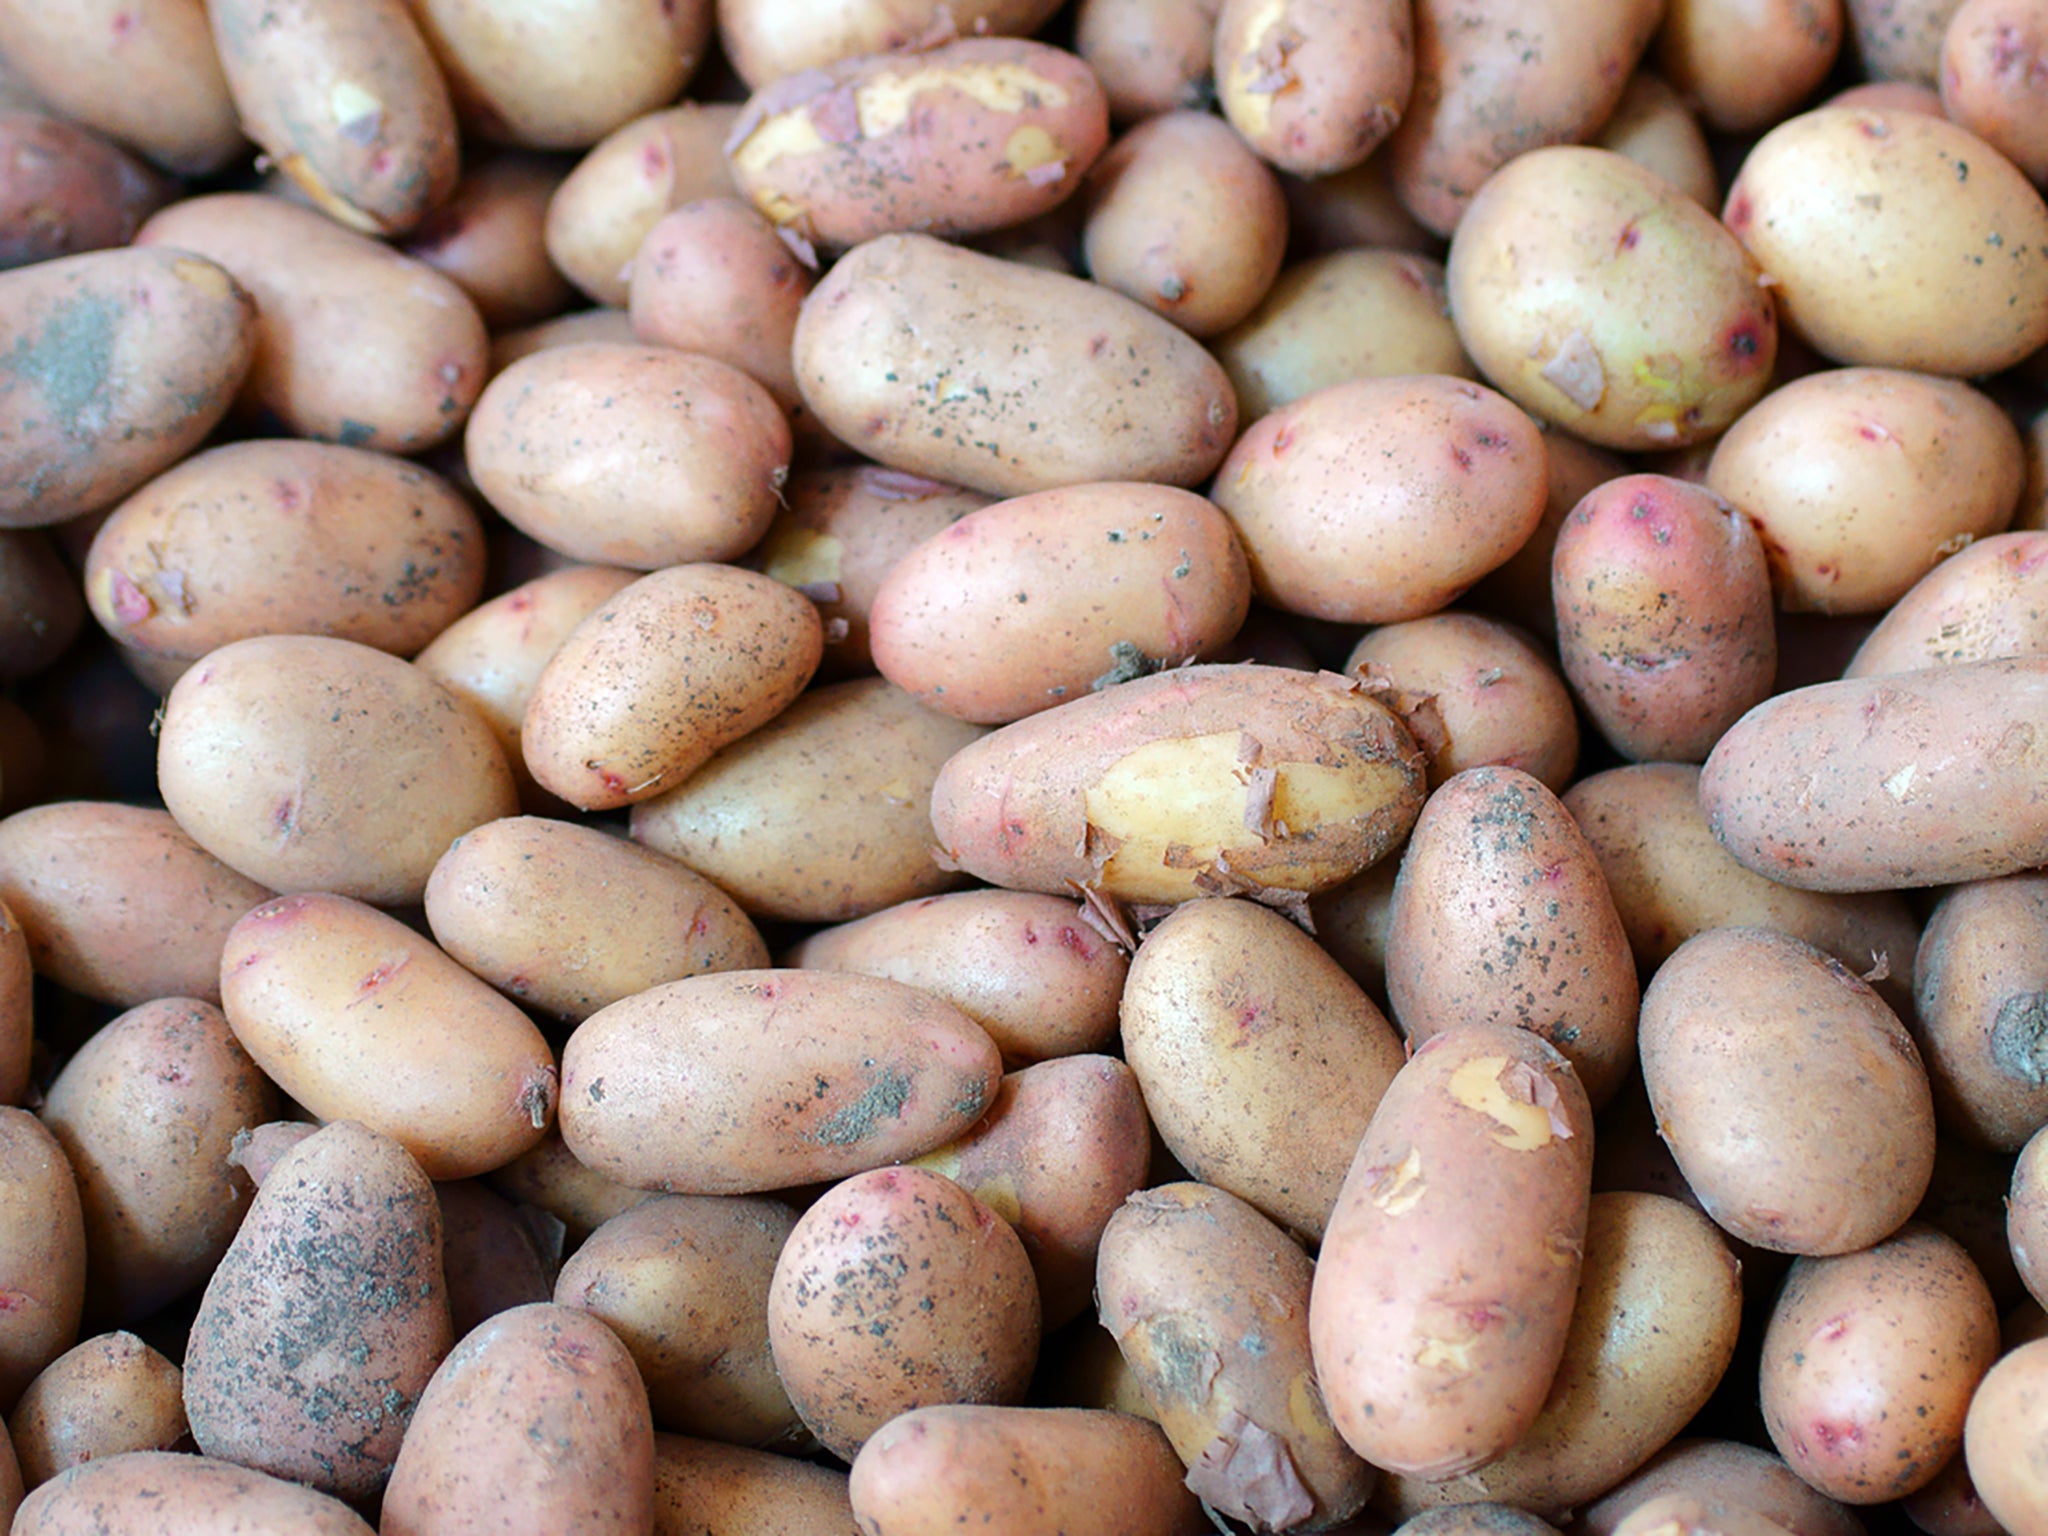 Jersey Royals are known for their delicate, waxy skins